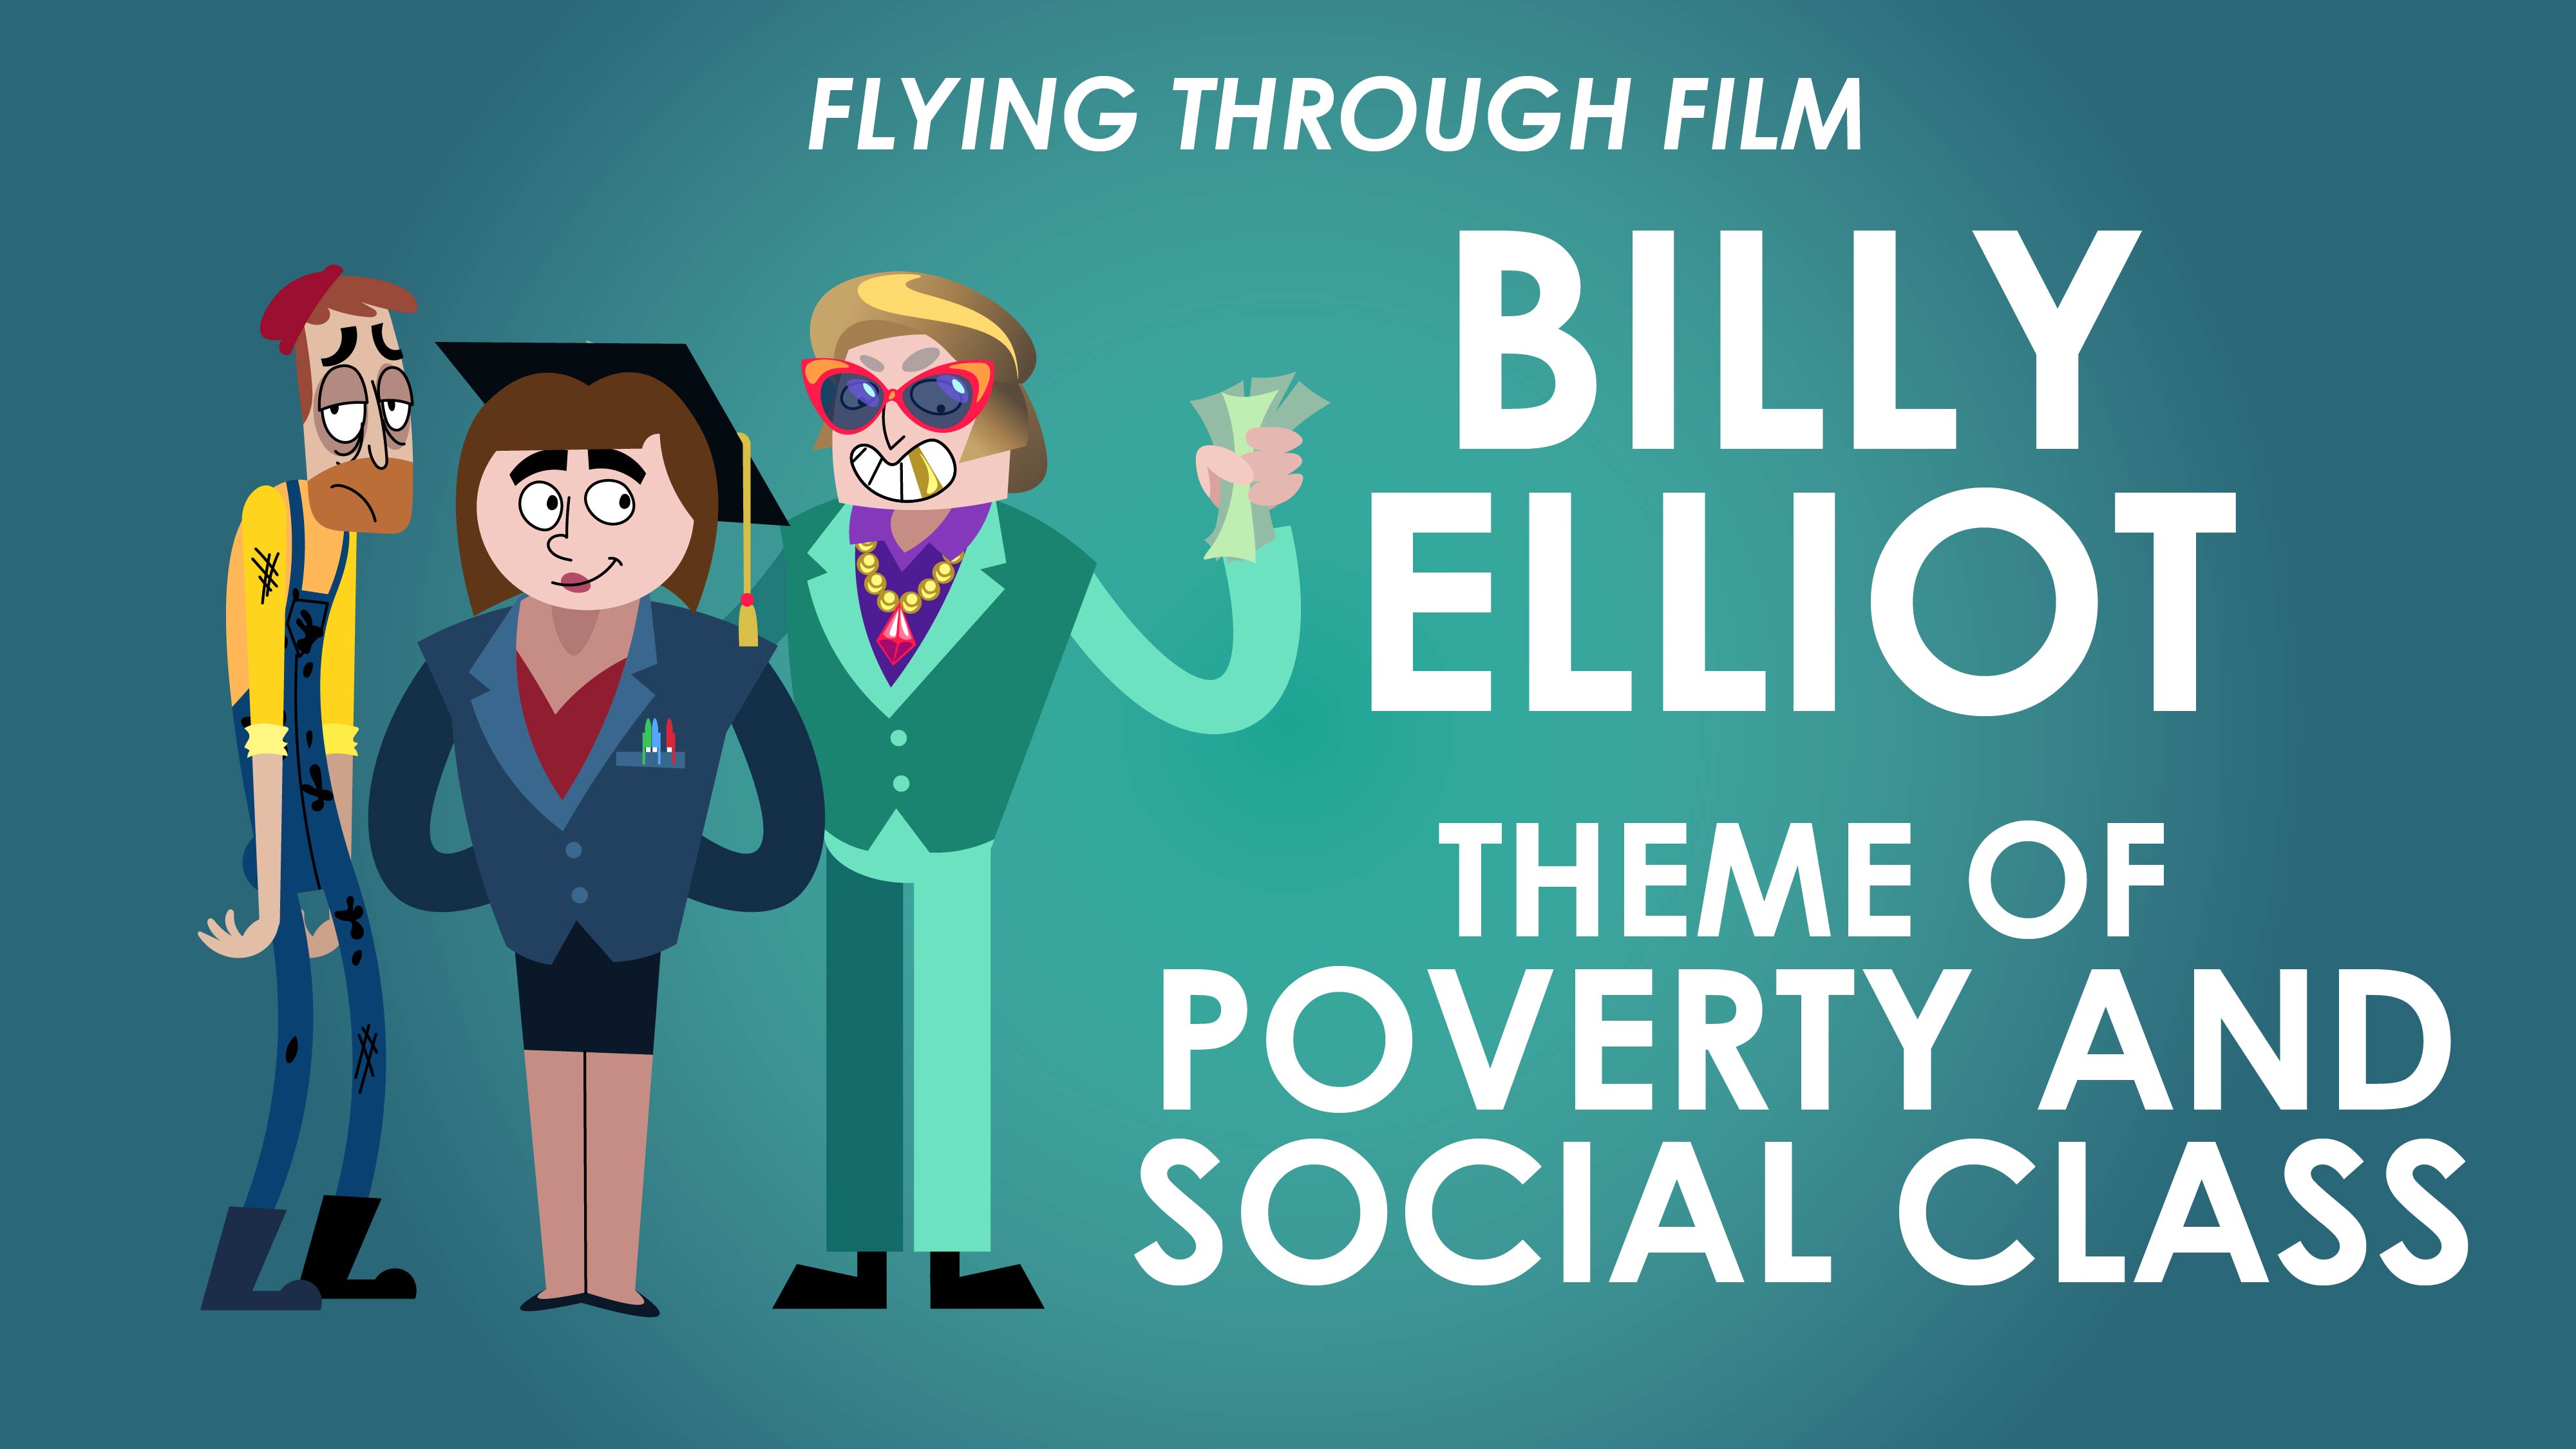 Billy Elliot - Theme of Poverty and Social Class - Flying Through Film Series